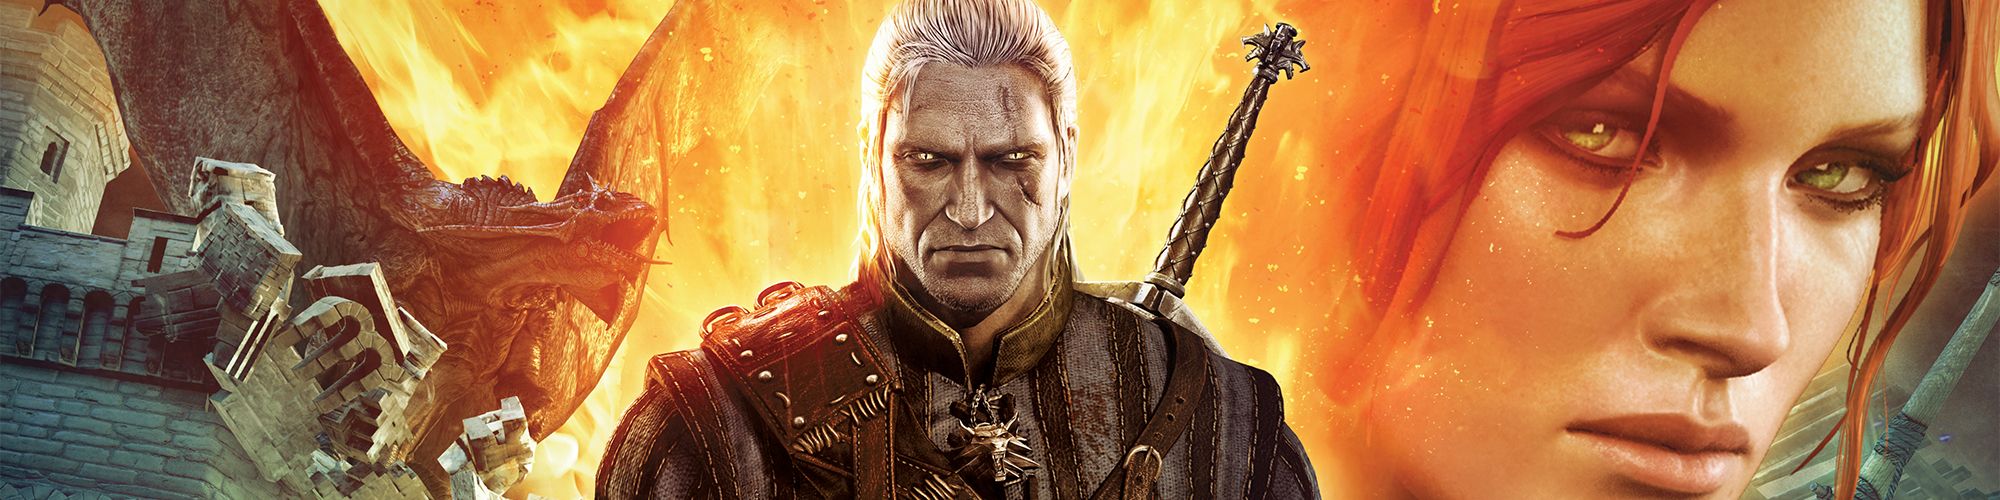 The Witcher 2: Assassins of Kings Enhanced Edition technical specifications for laptop